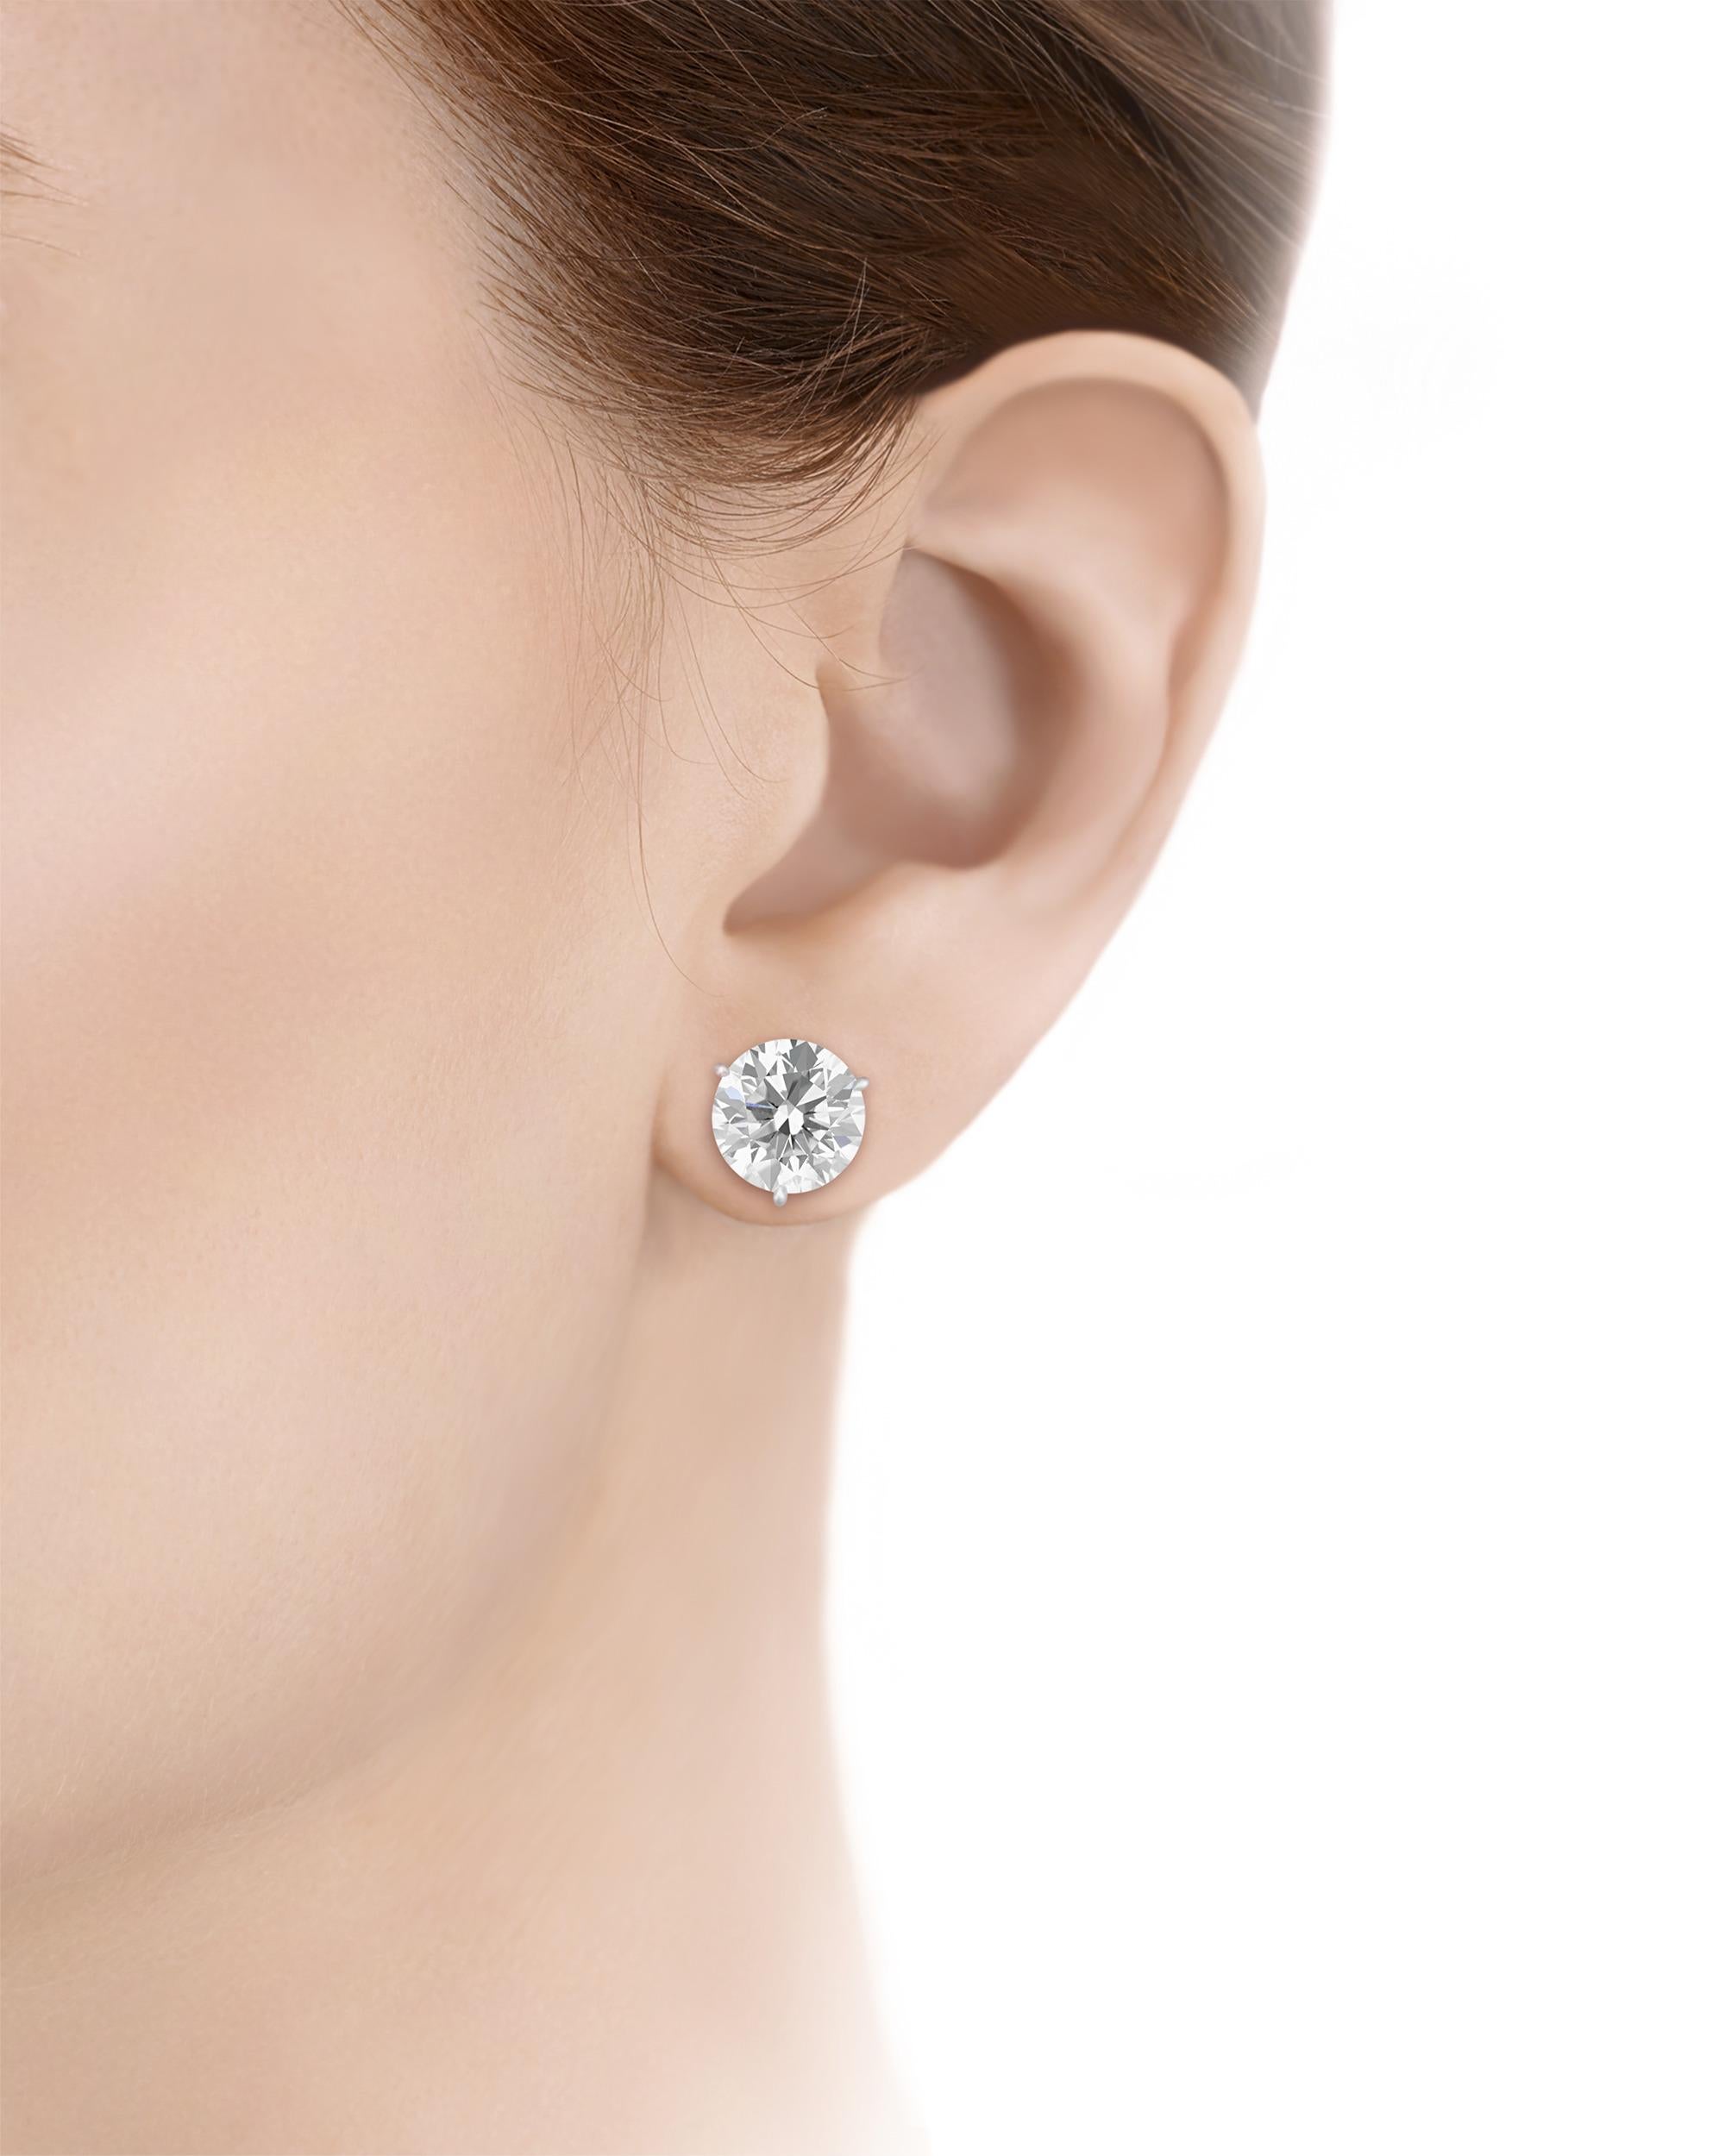 Exuding a timeless elegance, these diamond earrings make a statement. Two round brilliant-cut white diamonds, weighing 5.00 and 5.01 carats respectively, form the focal point of the earrings. Certified by the Gemological Institute of America, each